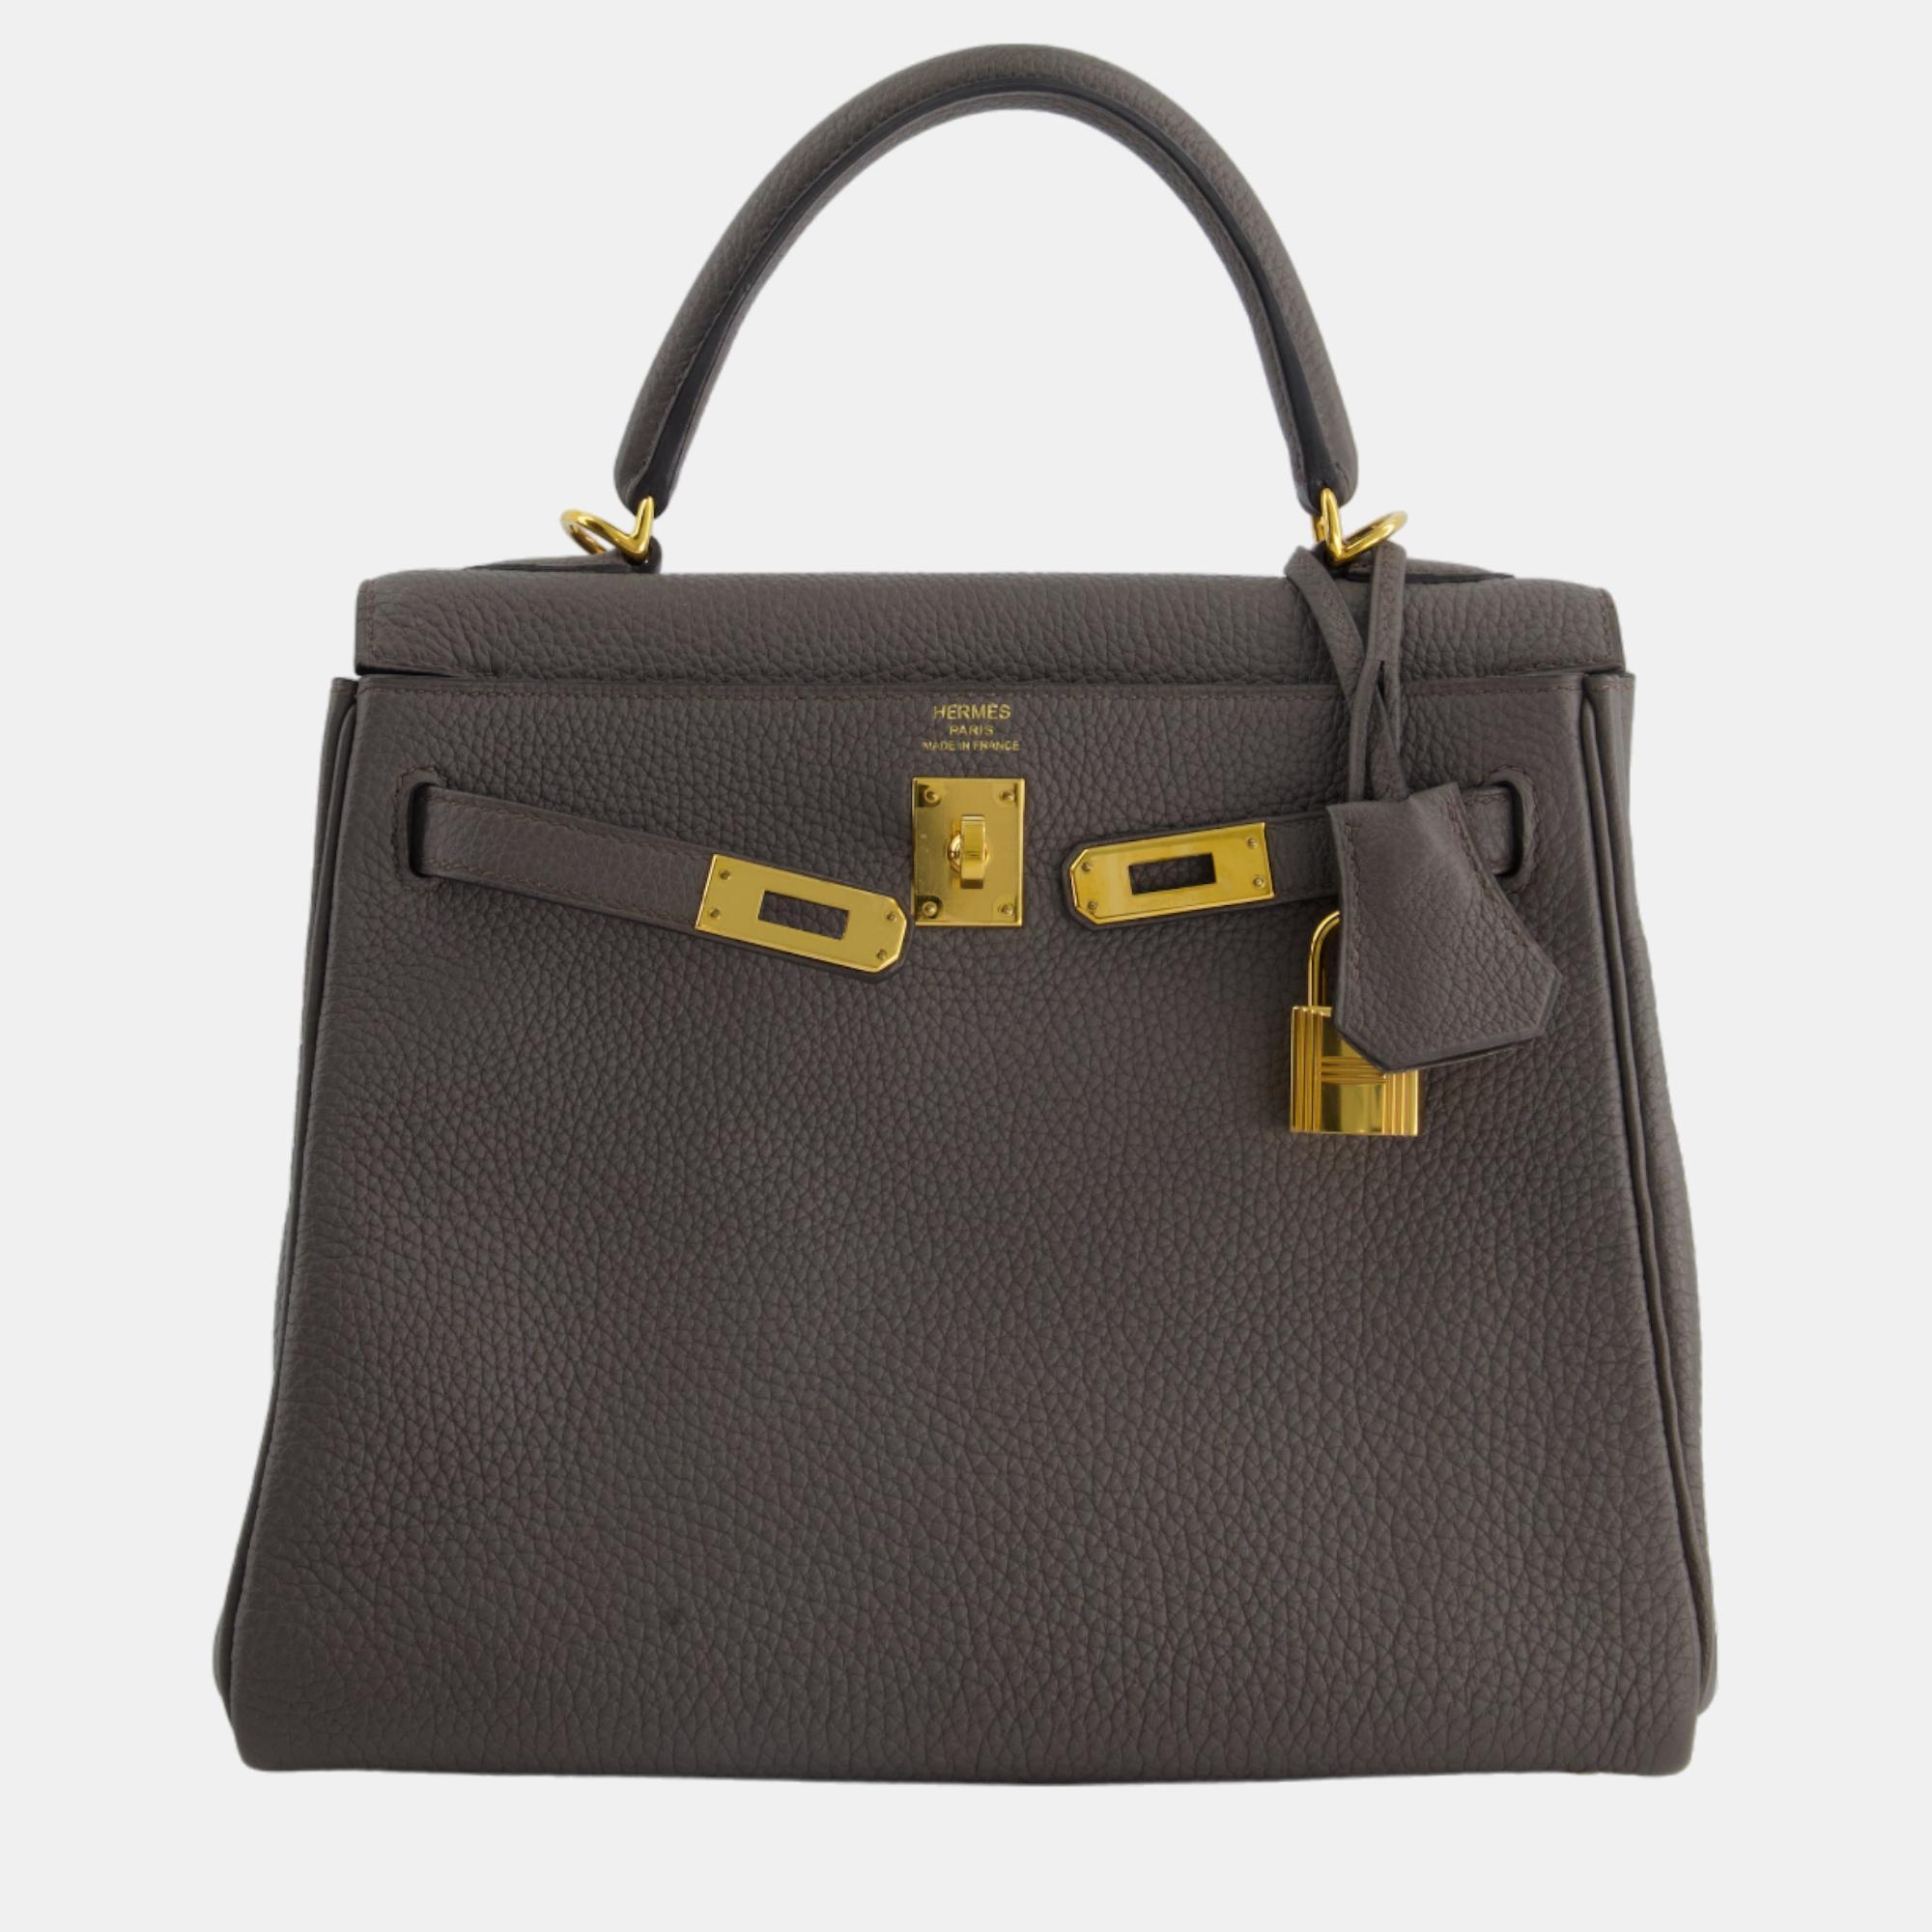 Hermes Kelly Retourne Bag 25cm In Gris Etain Togo Leather With Gold Hardware